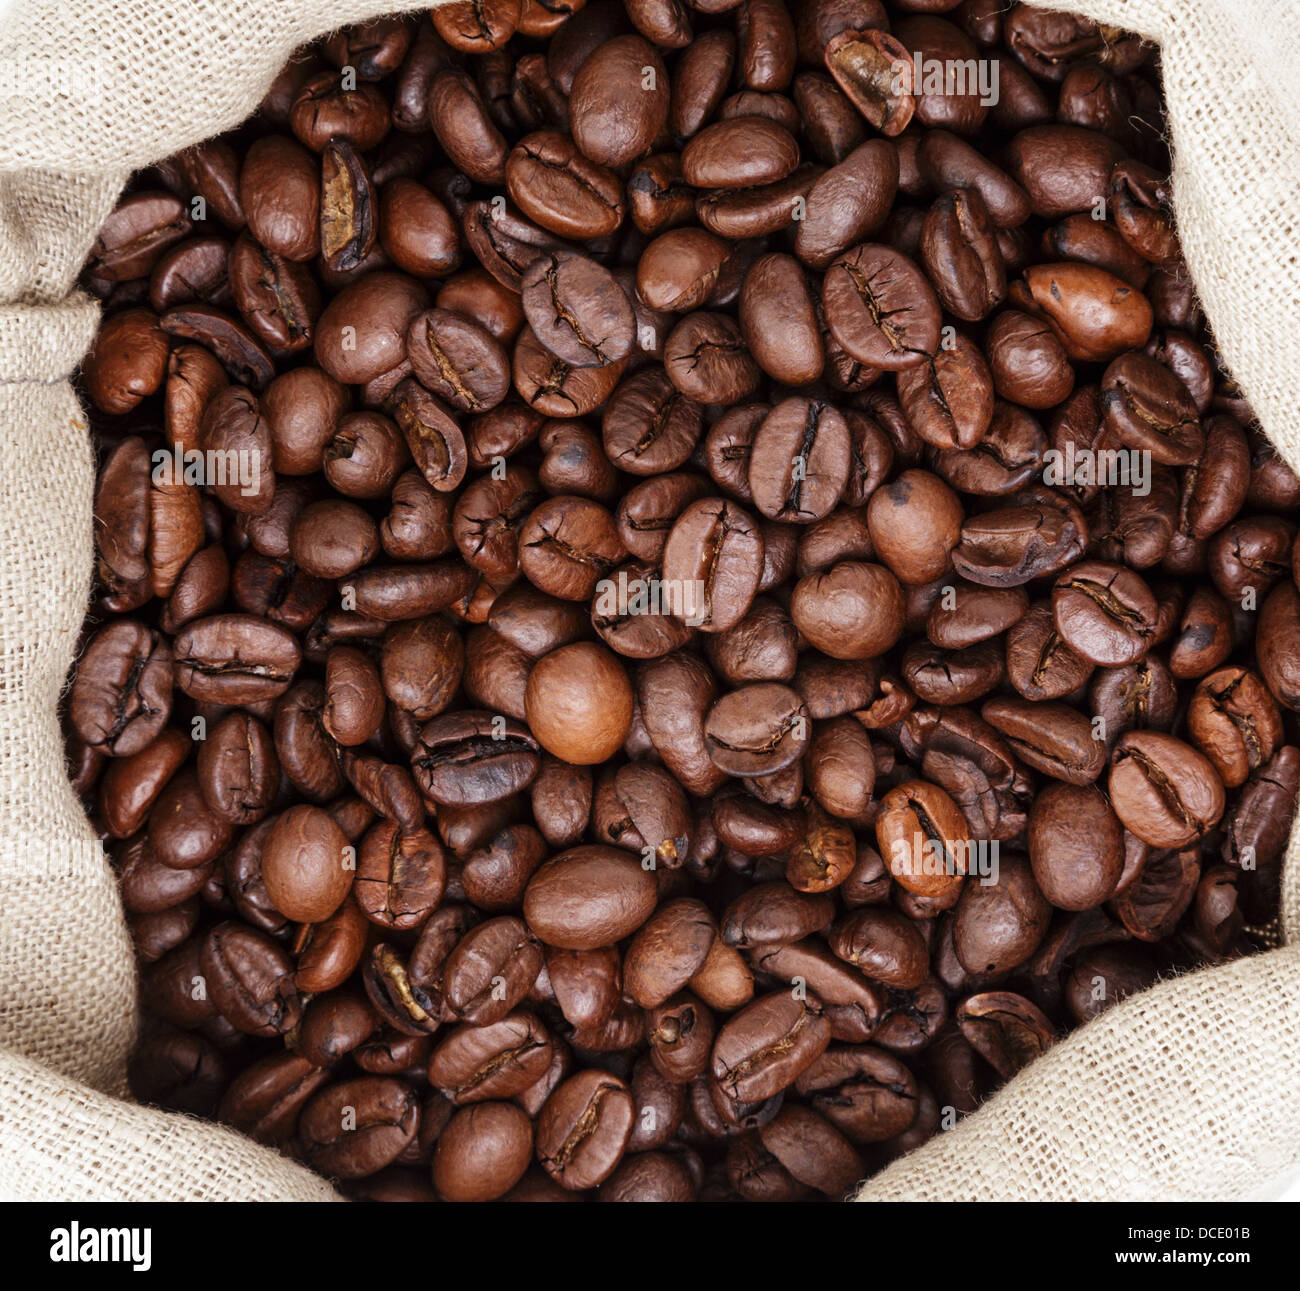 sack bag full of roasted coffee beans, close up Stock Photo